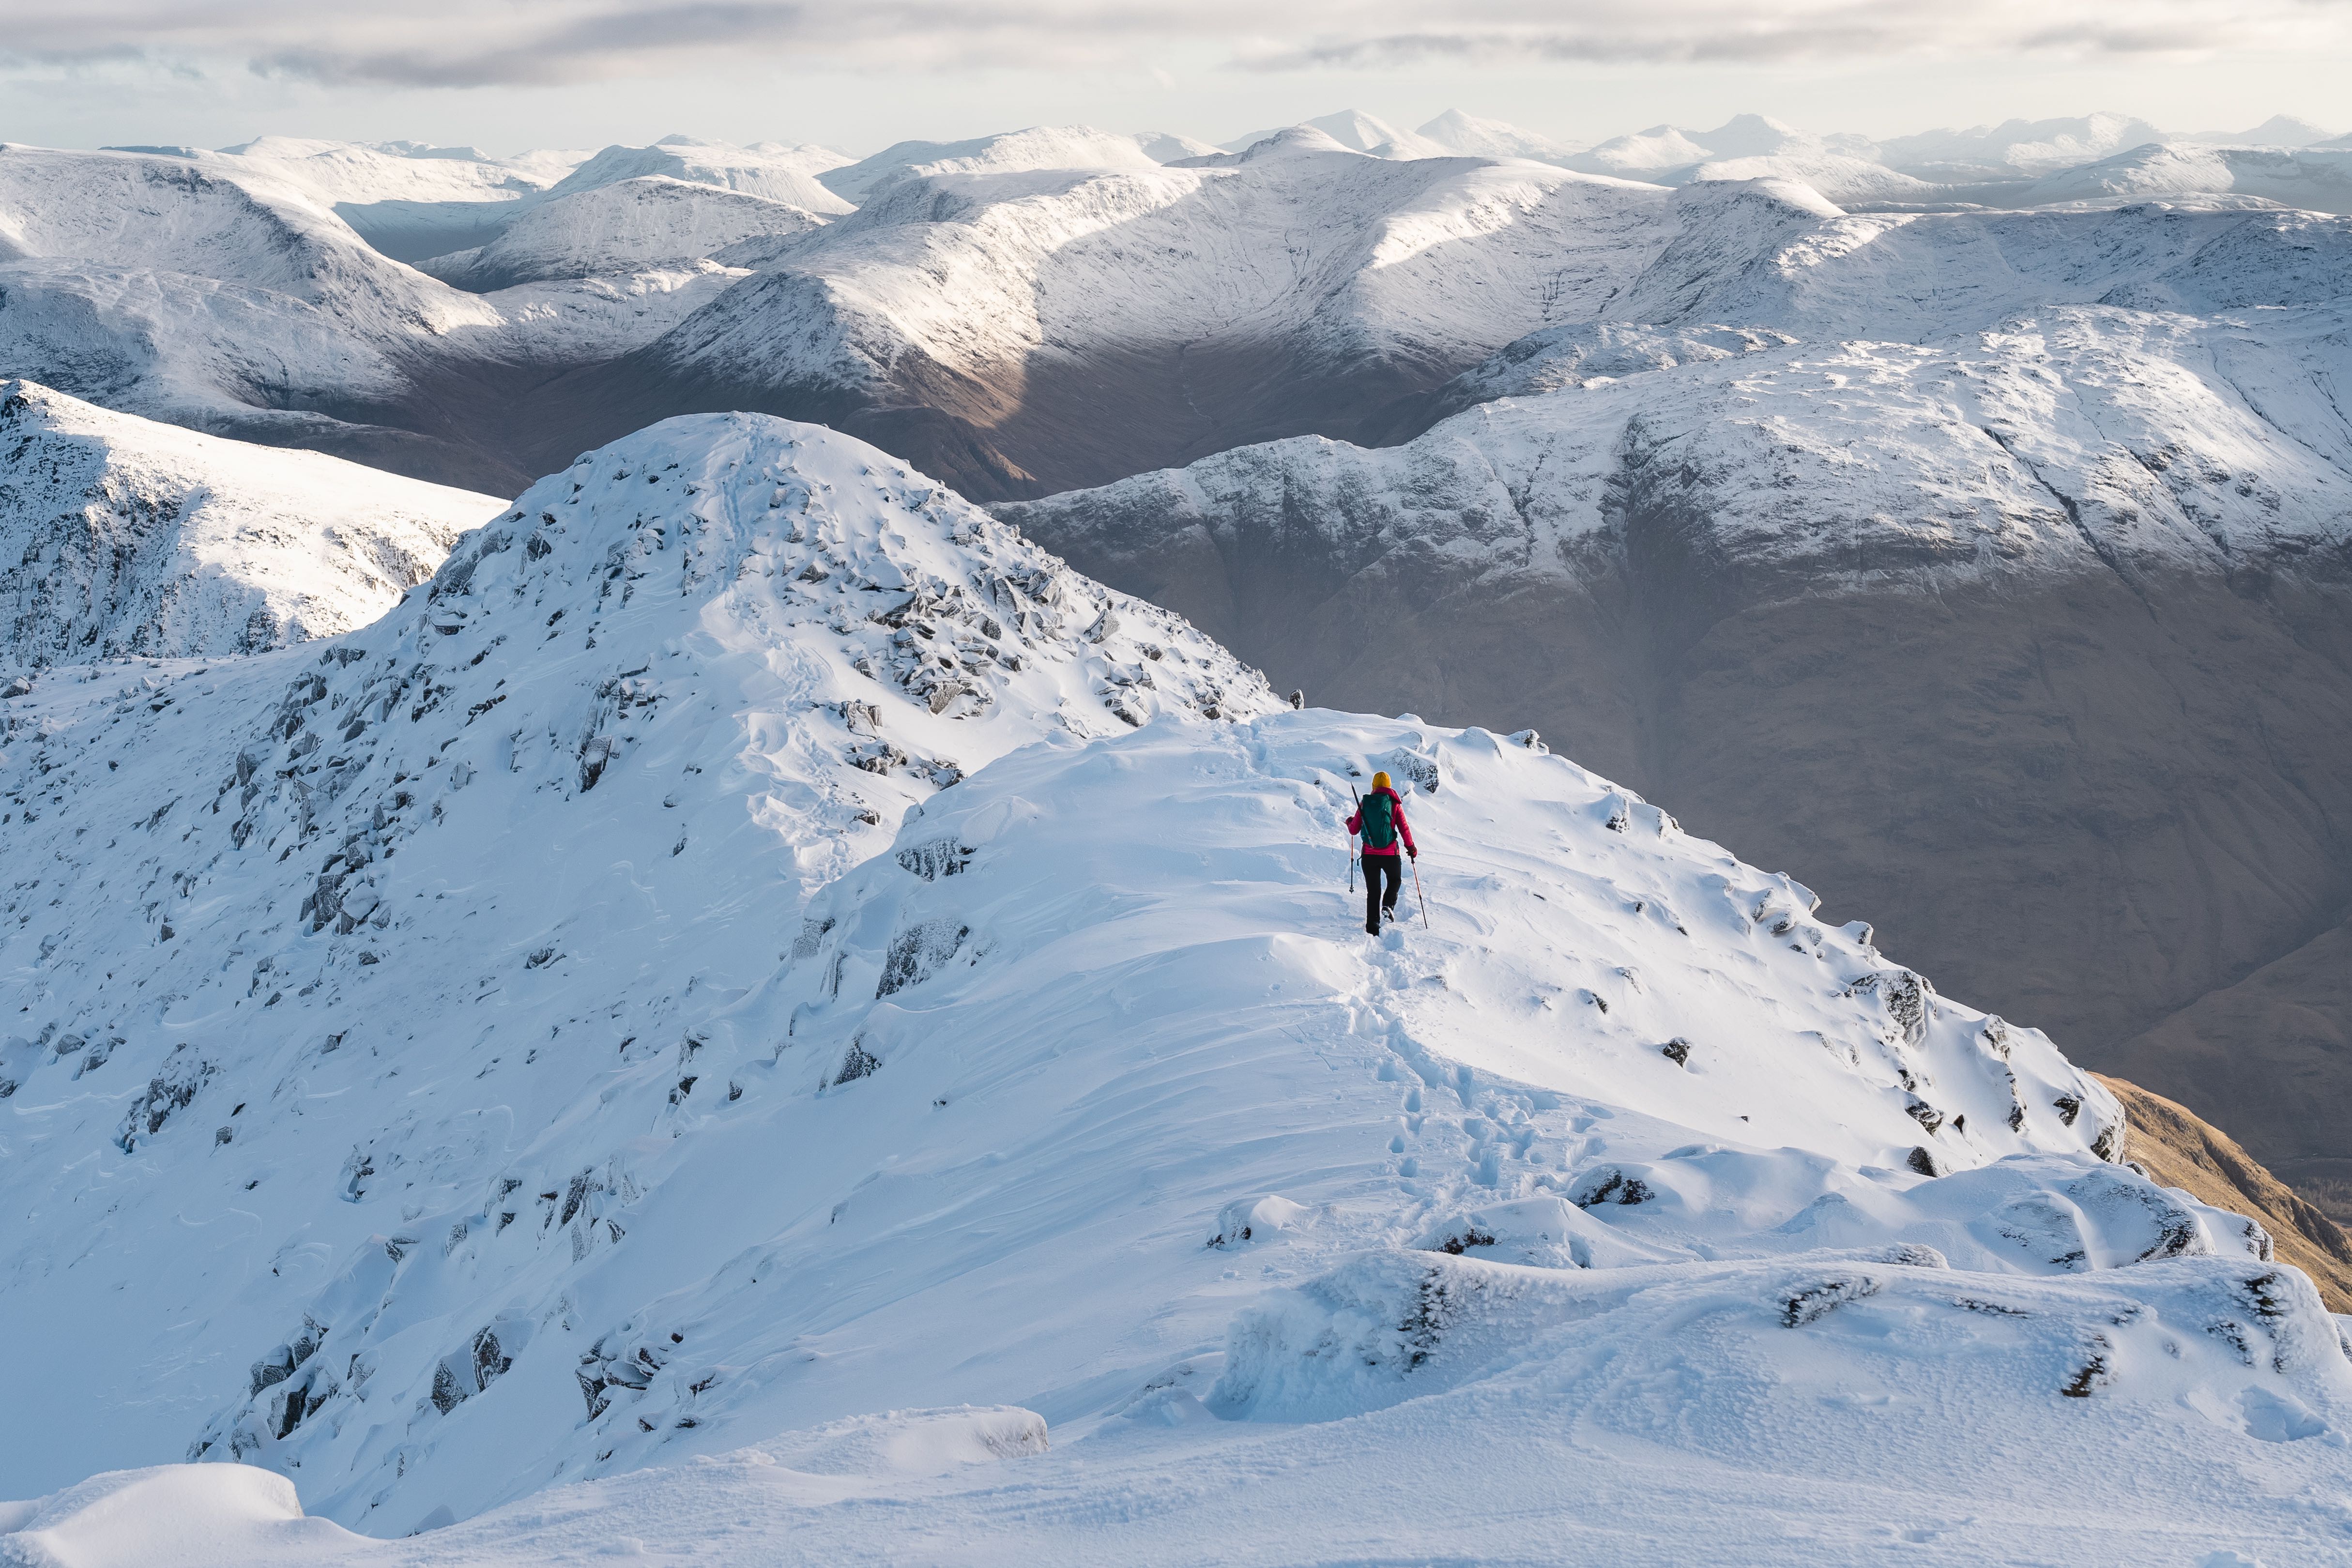 How To Stay Safe On The Hills In Winter